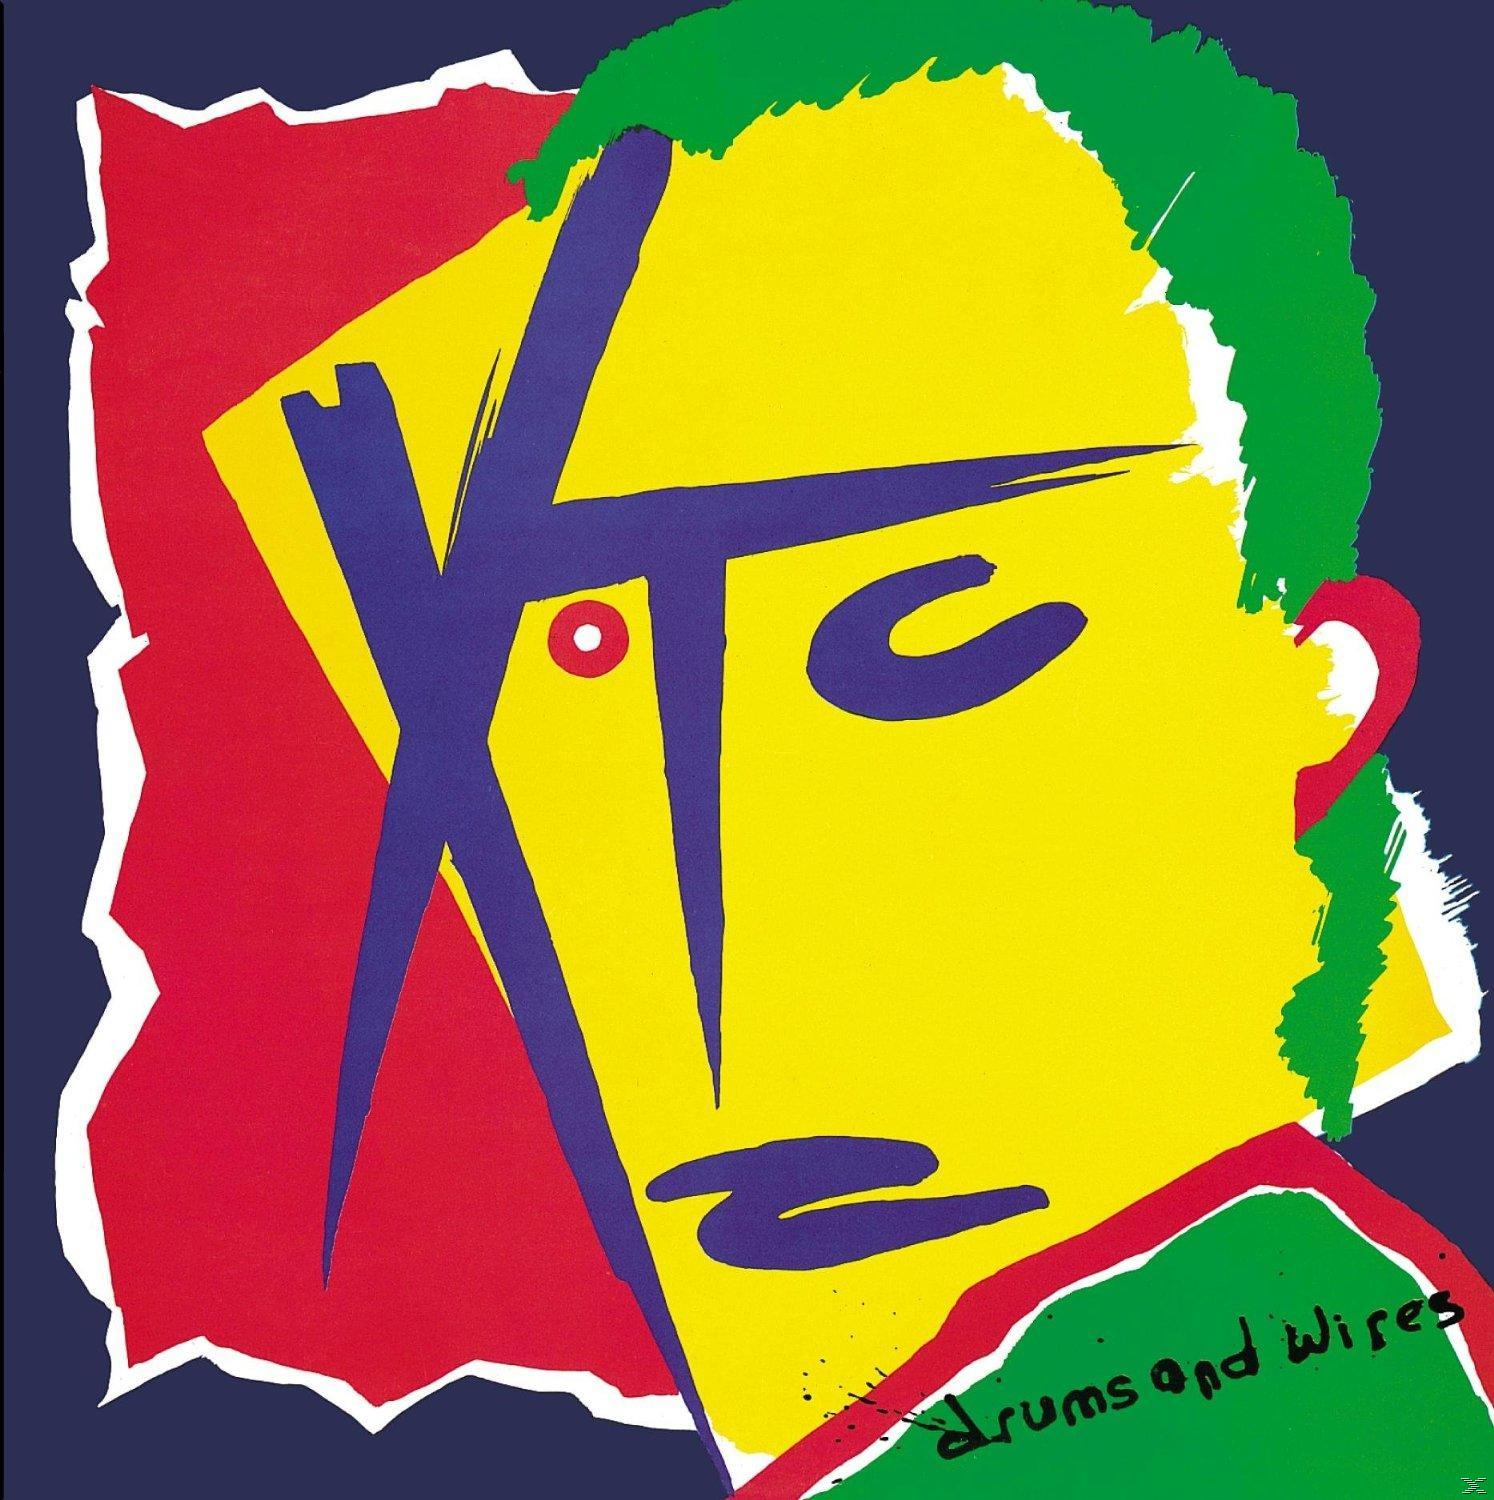 (Blu-ray & - (+CD) - Wires + Drums CD) XTC